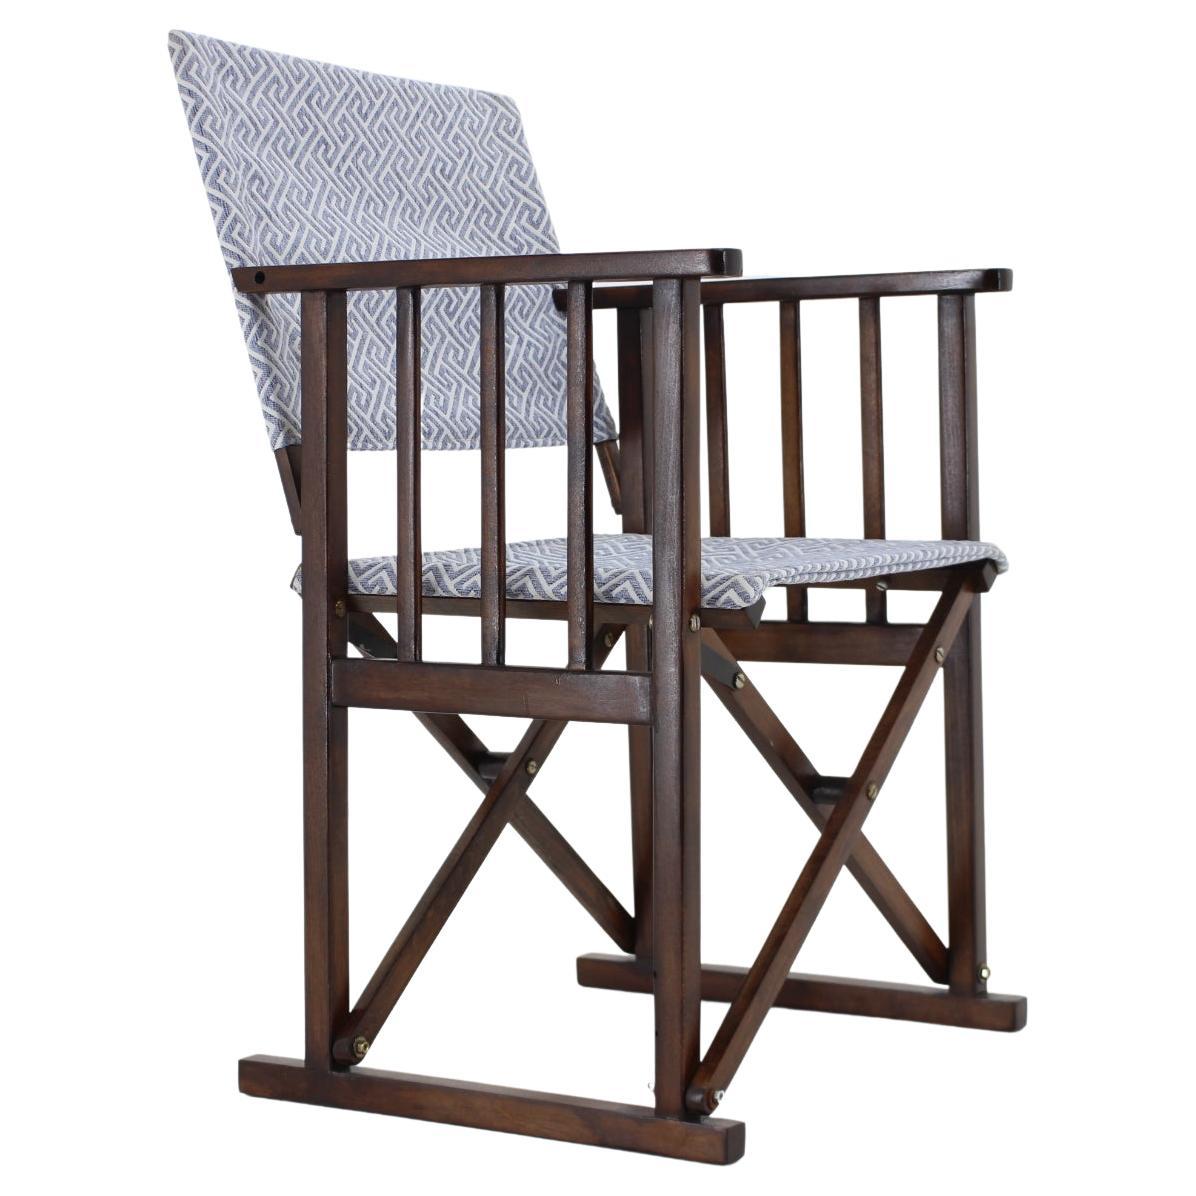 1970 Folding Director's Chair, Europe